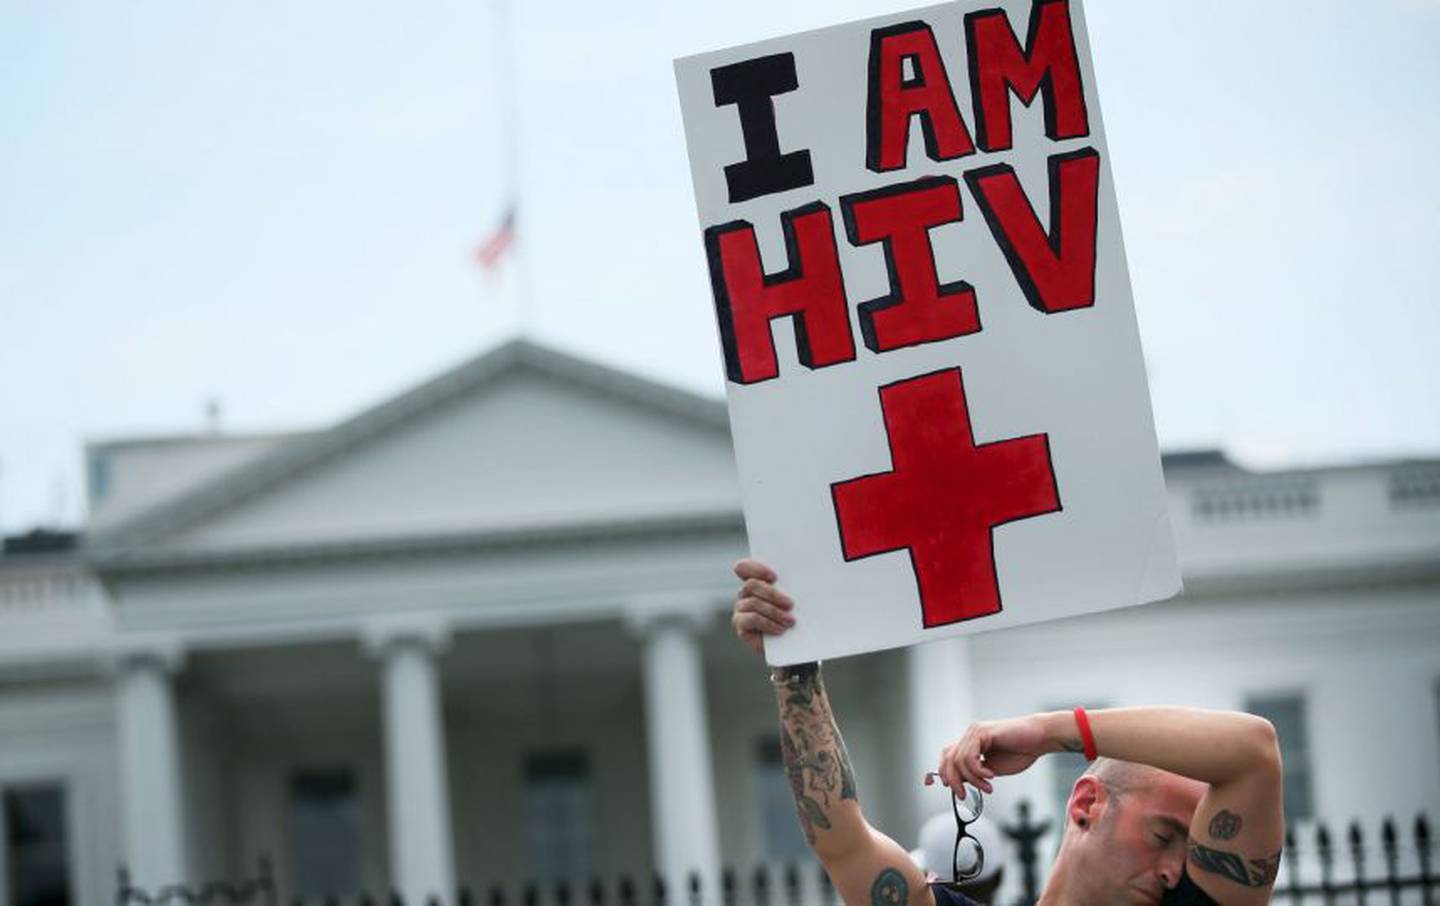 Health: A third person is cured of HIV using stem cells